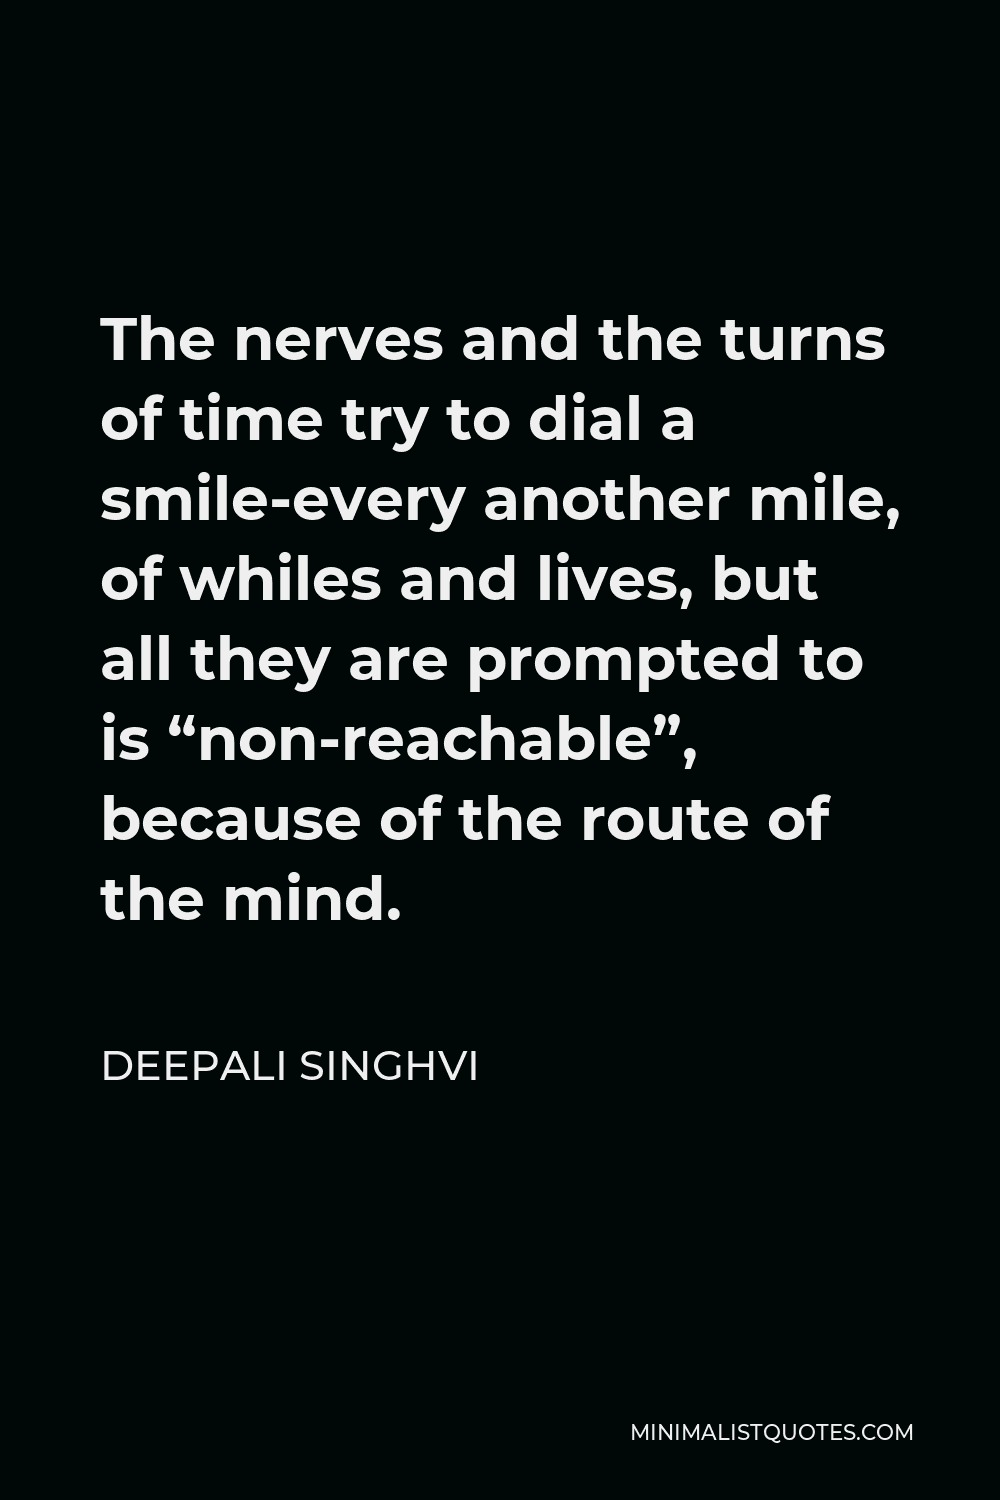 Deepali Singhvi Quote - The nerves and the turns of time try to dial a smile-every another mile, of whiles and lives, but all they are prompted to is “non-reachable”, because of the route of the mind.